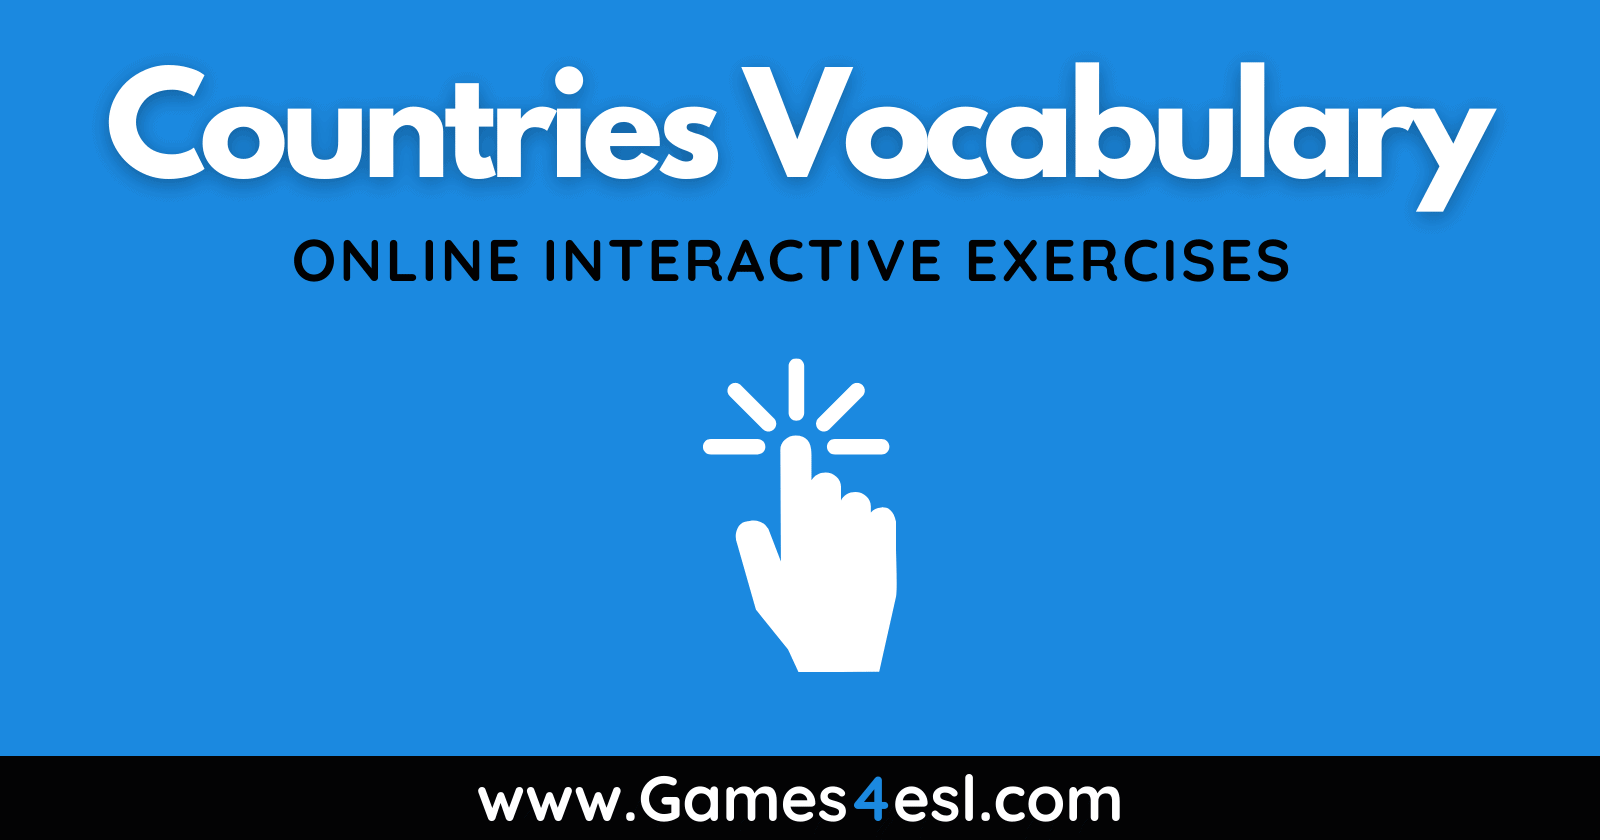 Countries Vocabulary Exercises